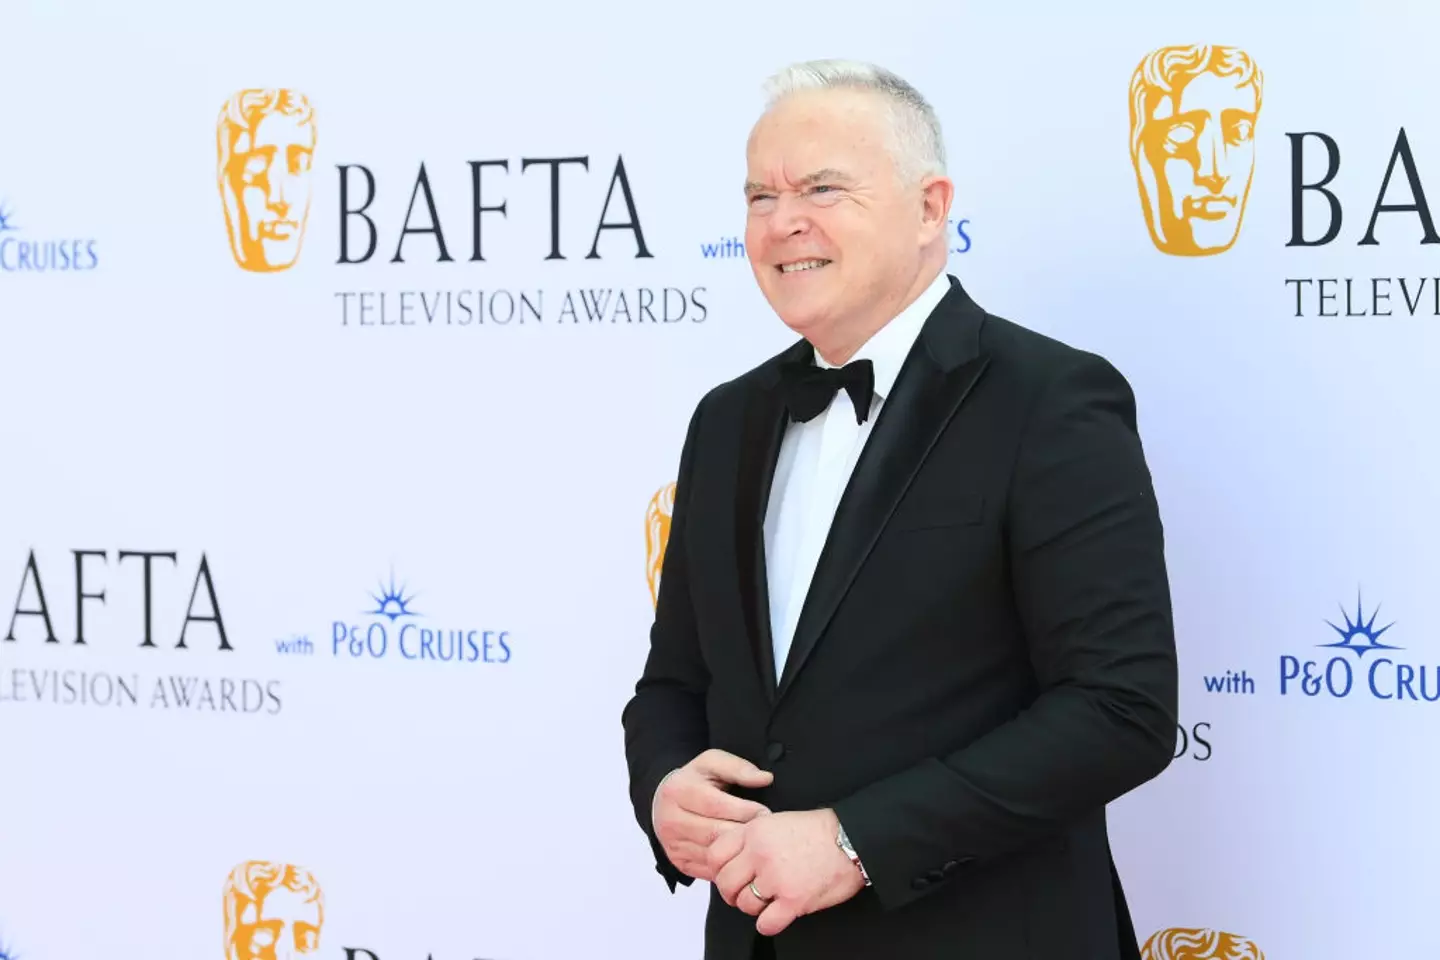 Huw Edwards has been named as the BBC presenter at the center of the allegations.